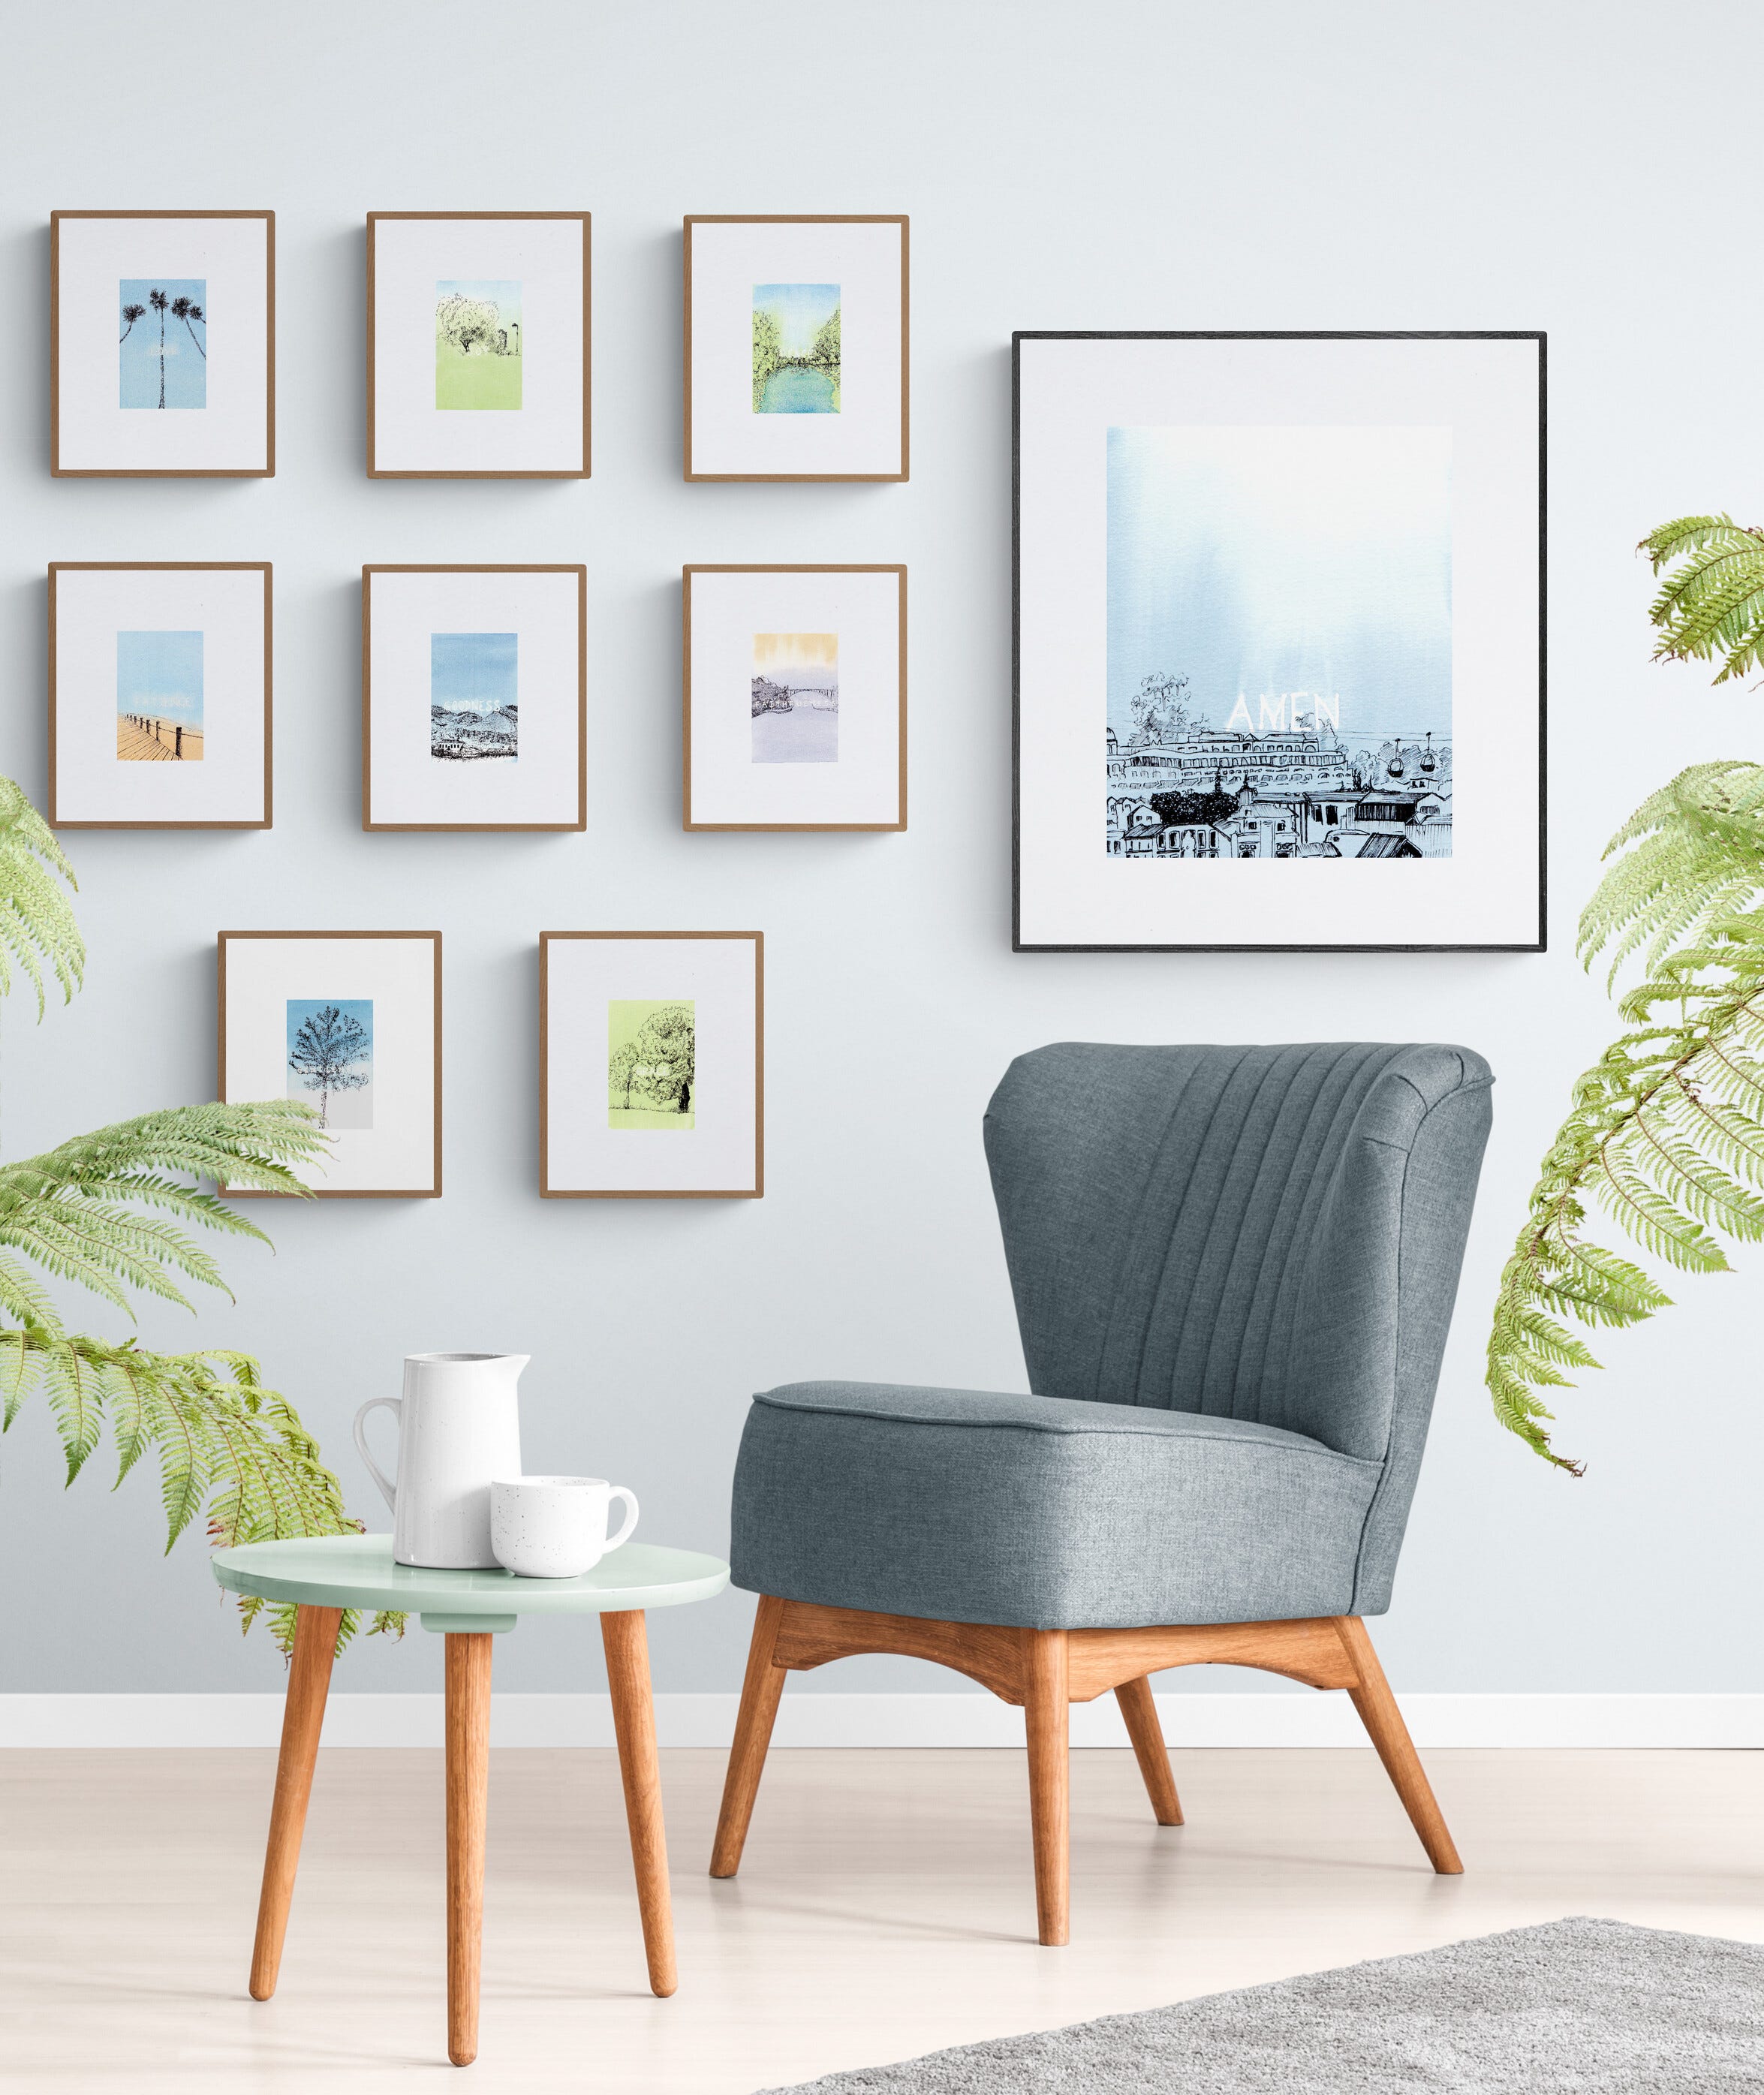 Image: nine framed line drawing with watercolour artwork from Meditations in words collection, in a corner of a sitting room setting, with a muted blue armchair, pastel green side table, and leafy plants.